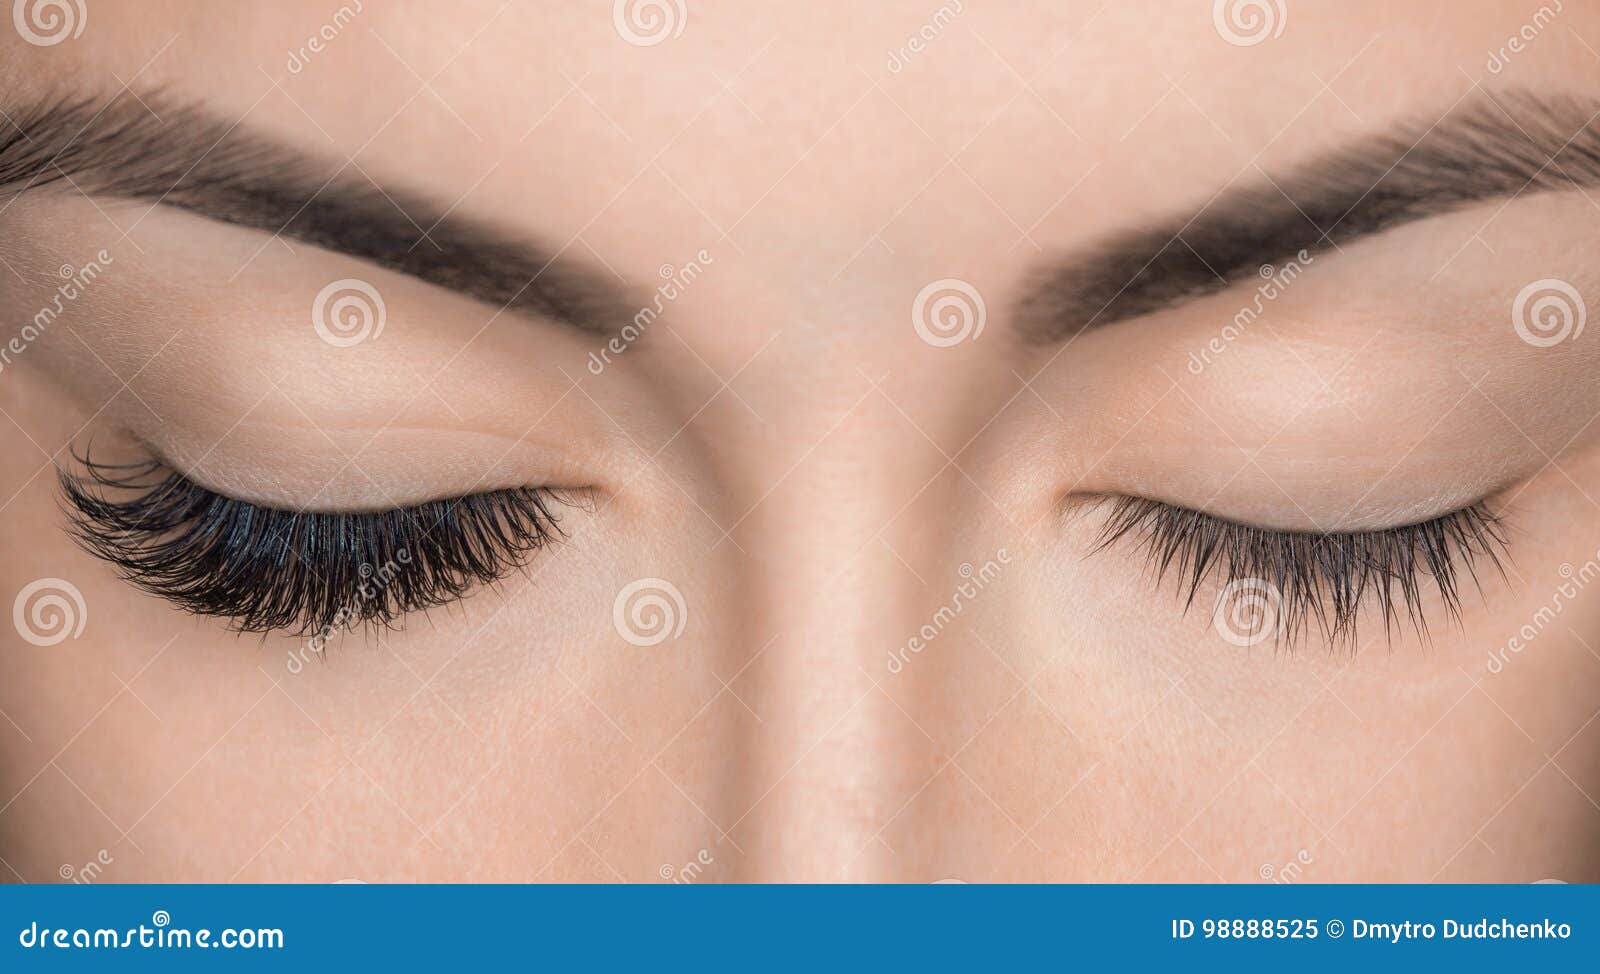 eyelash removal procedure close up. beautiful woman with long lashes in a beauty salon